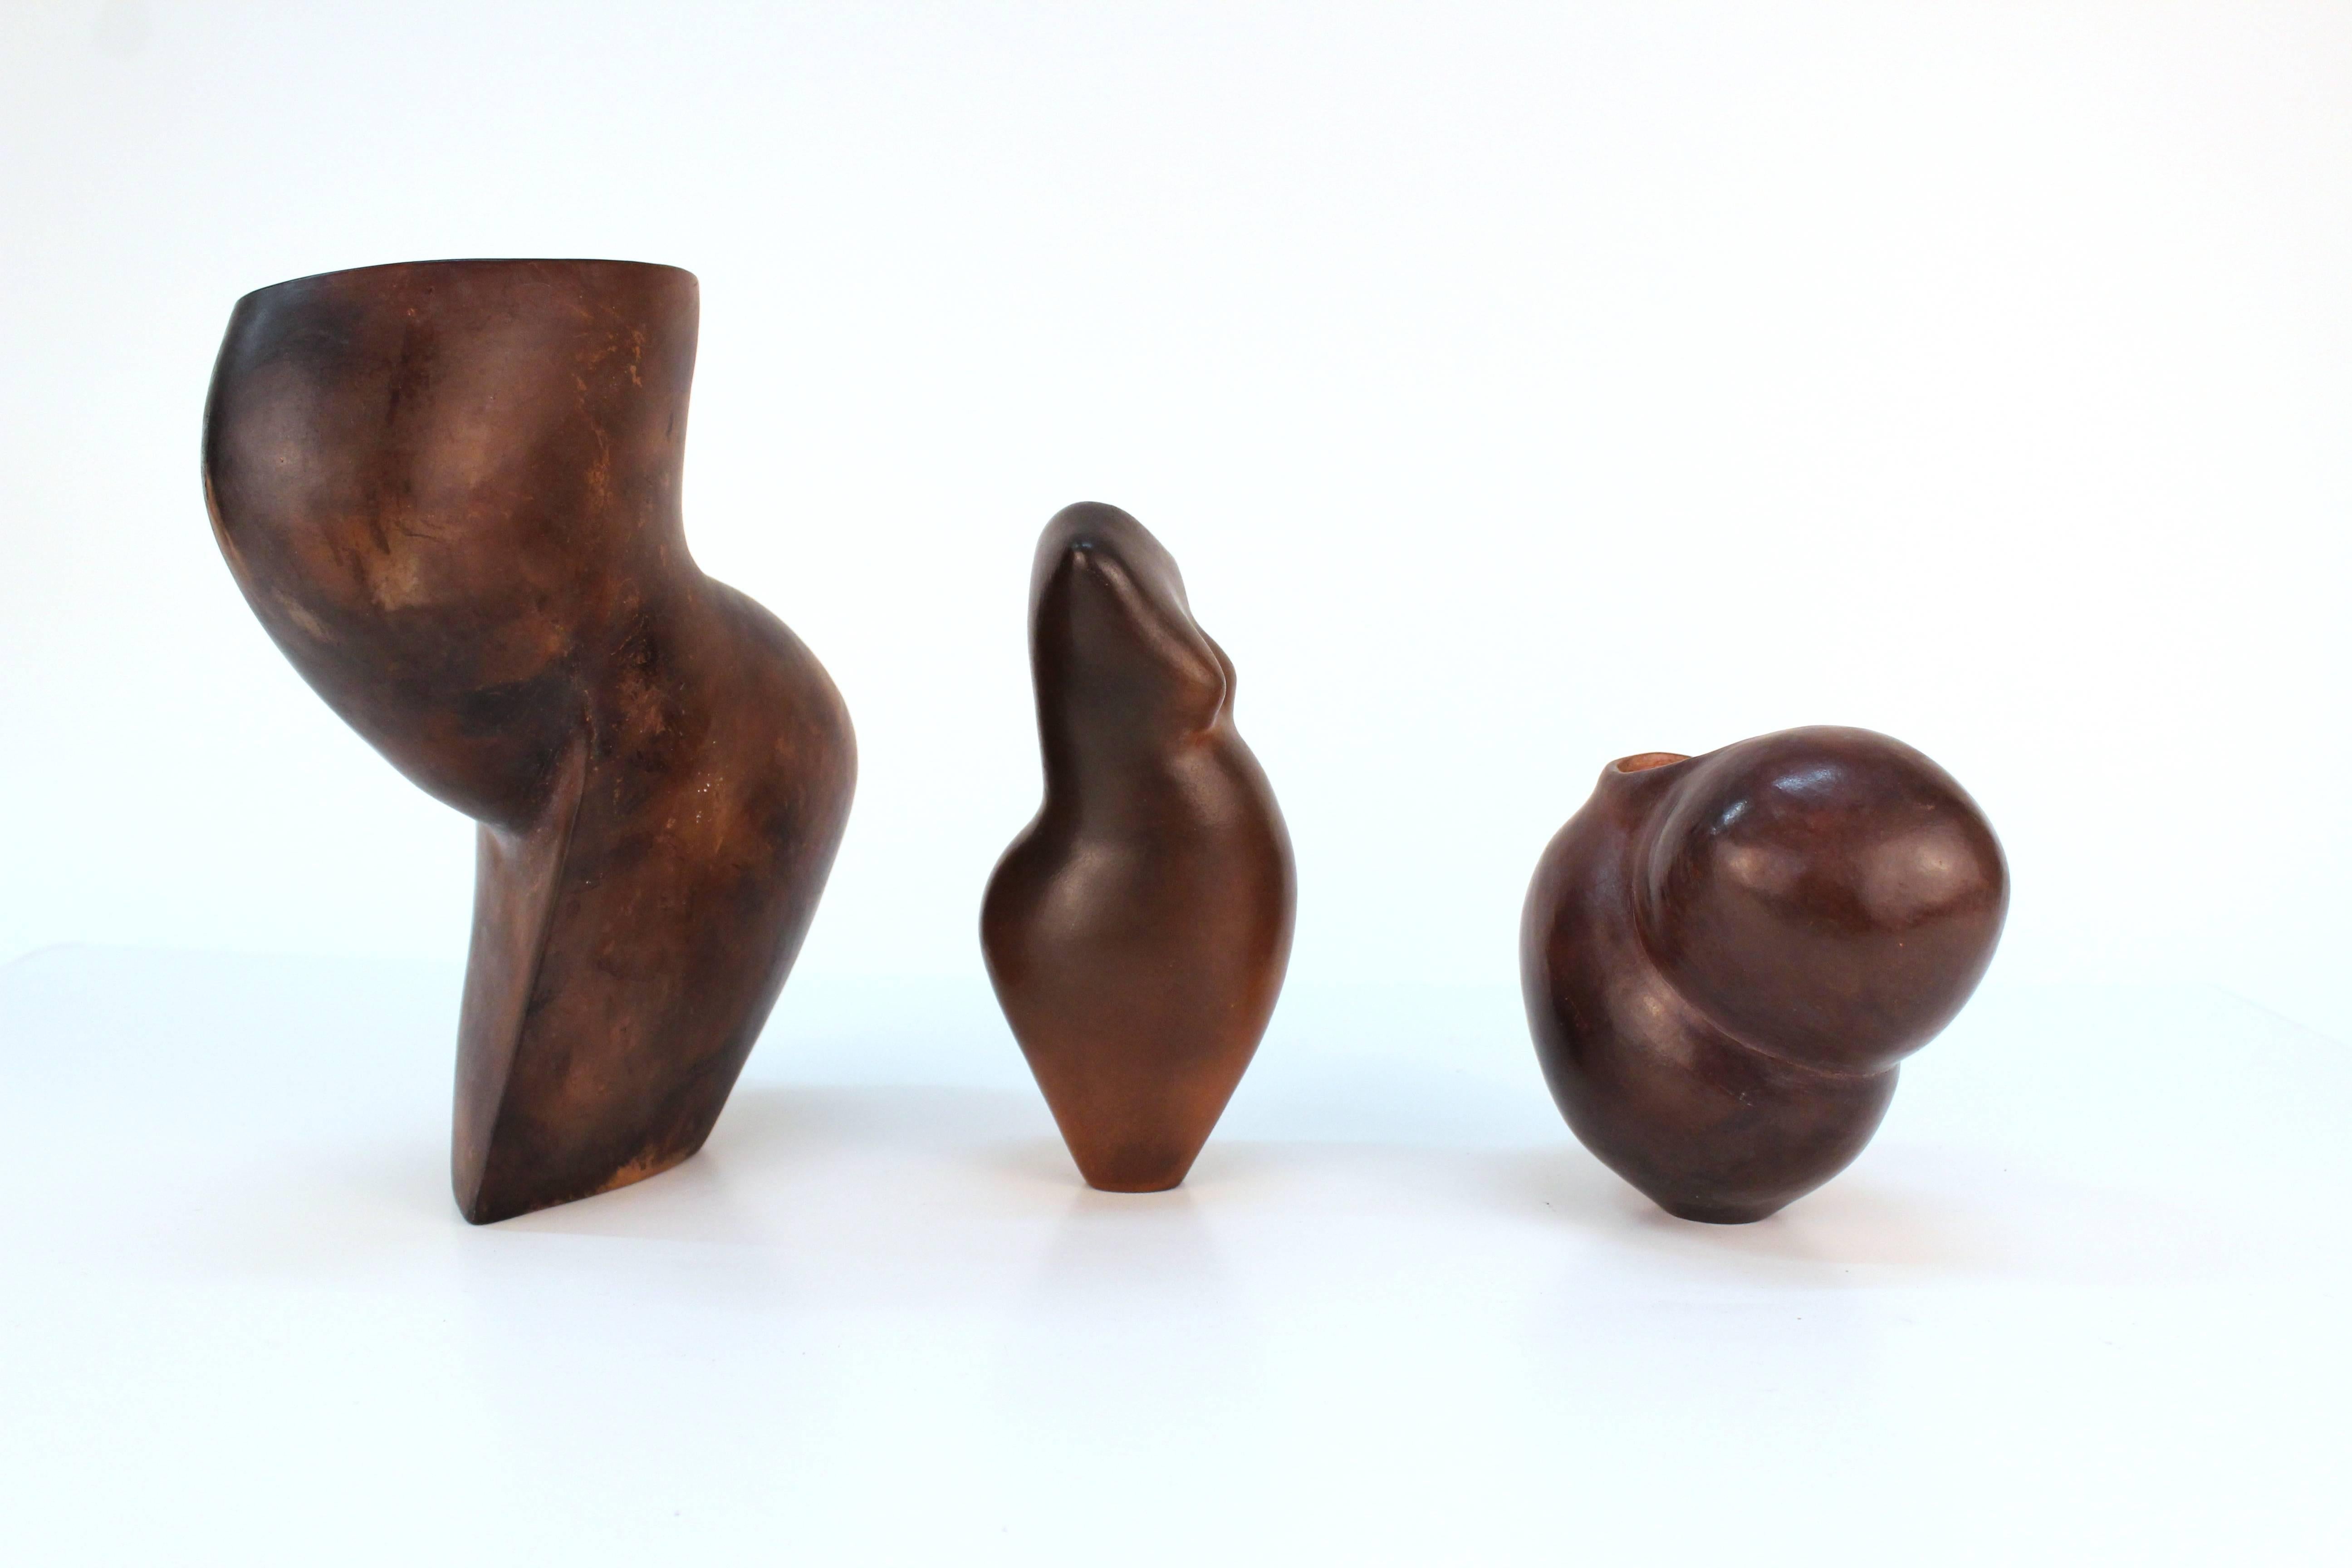 A collection of several sculptural ceramic vases by Louise Black. Available as a group or individually.

Louise Black torso vase 
Measures: 3 inch. D x 2.5 inch. W x 6.5 inch. H 
$250

Louise Black vase with two organic bulbs 
Measures: 3